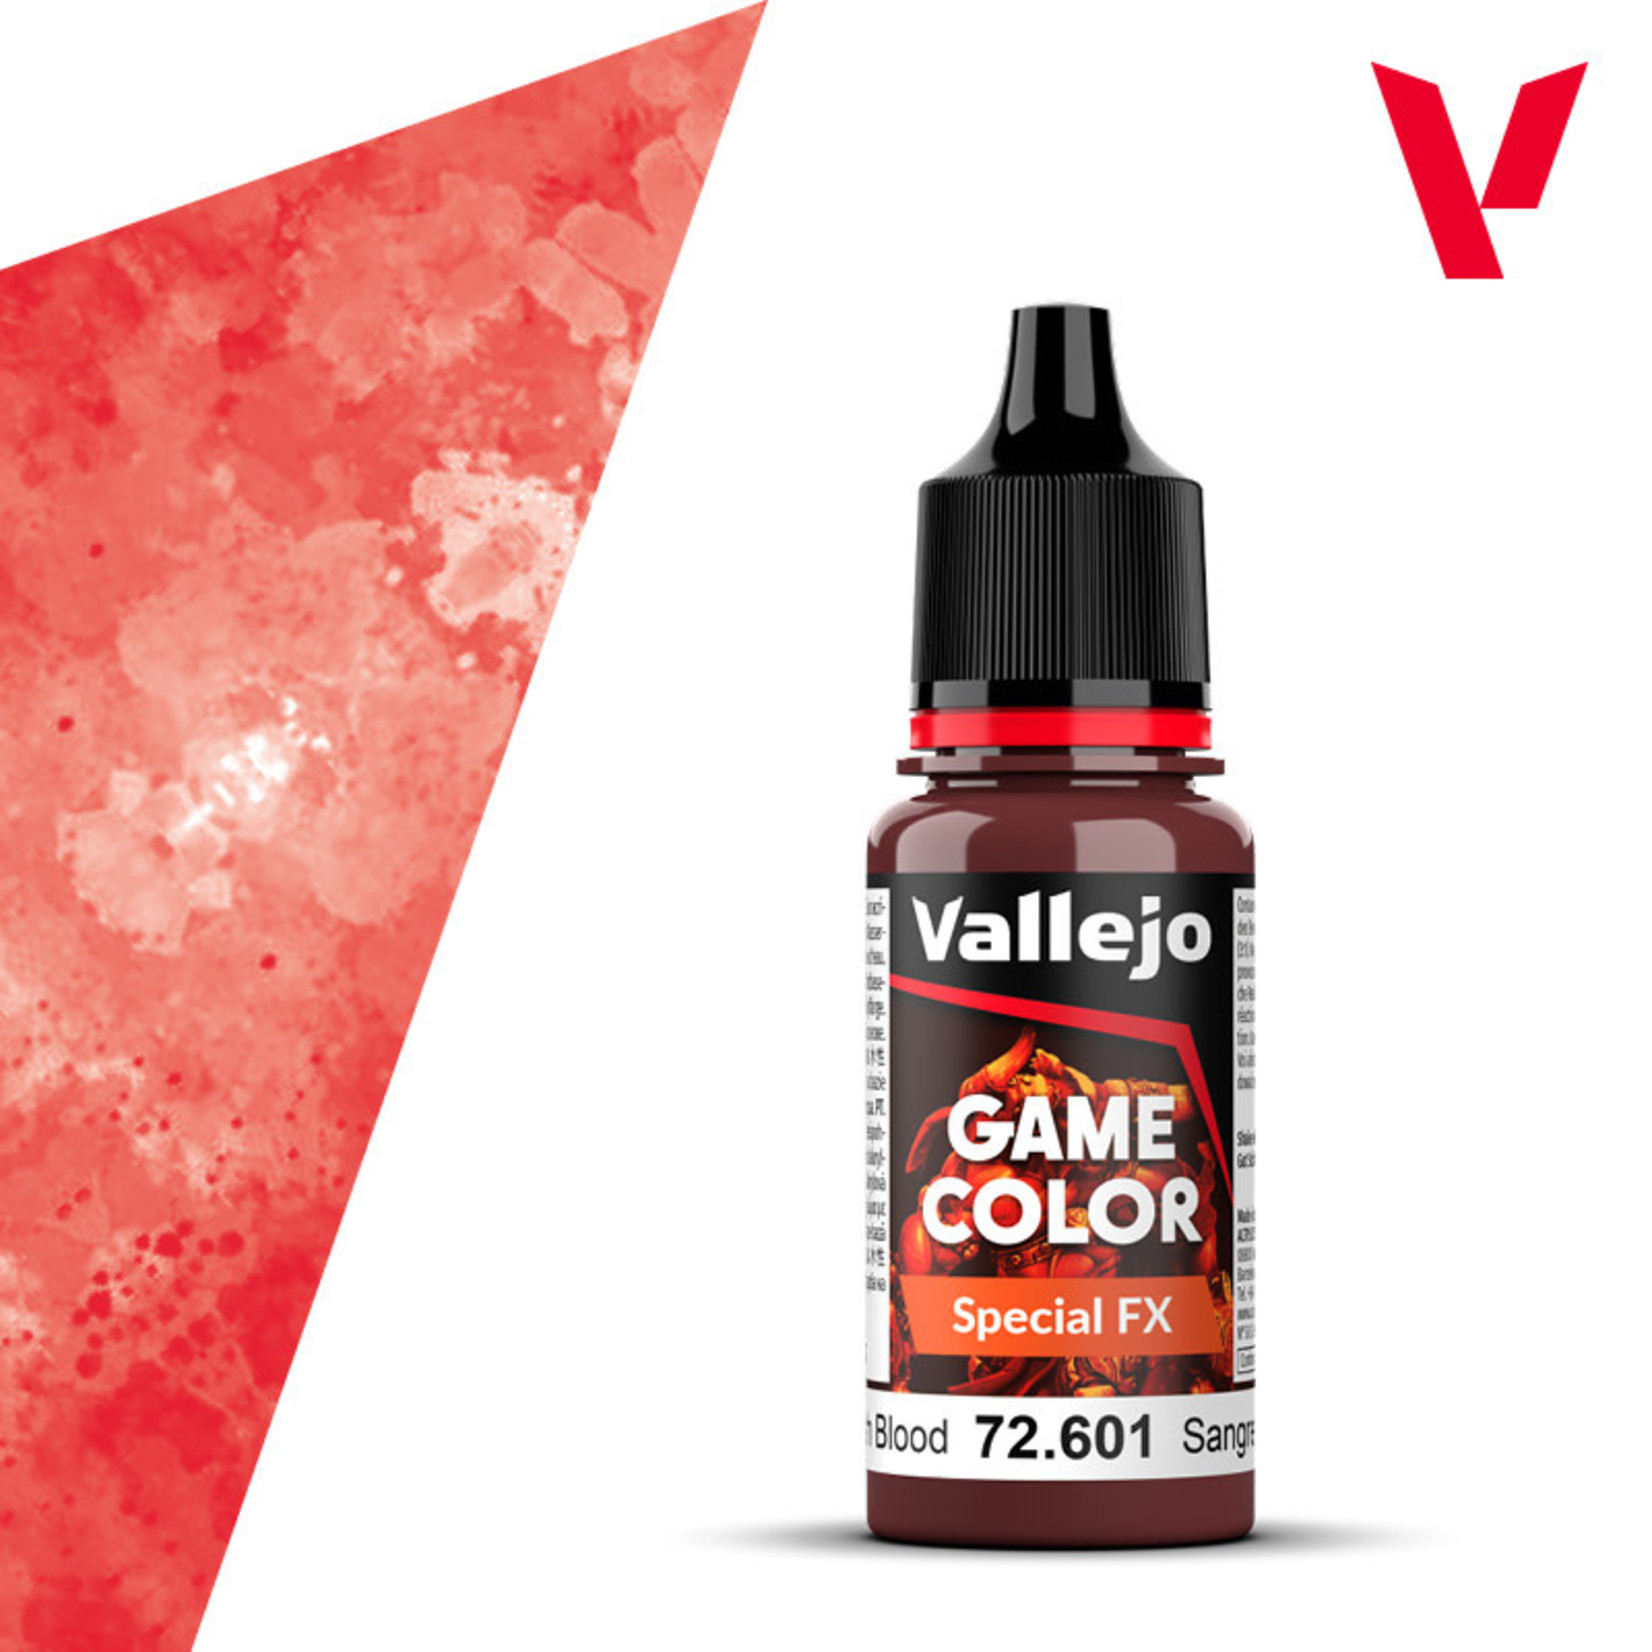 Vallejo Game Color Special FX Fresh Blood